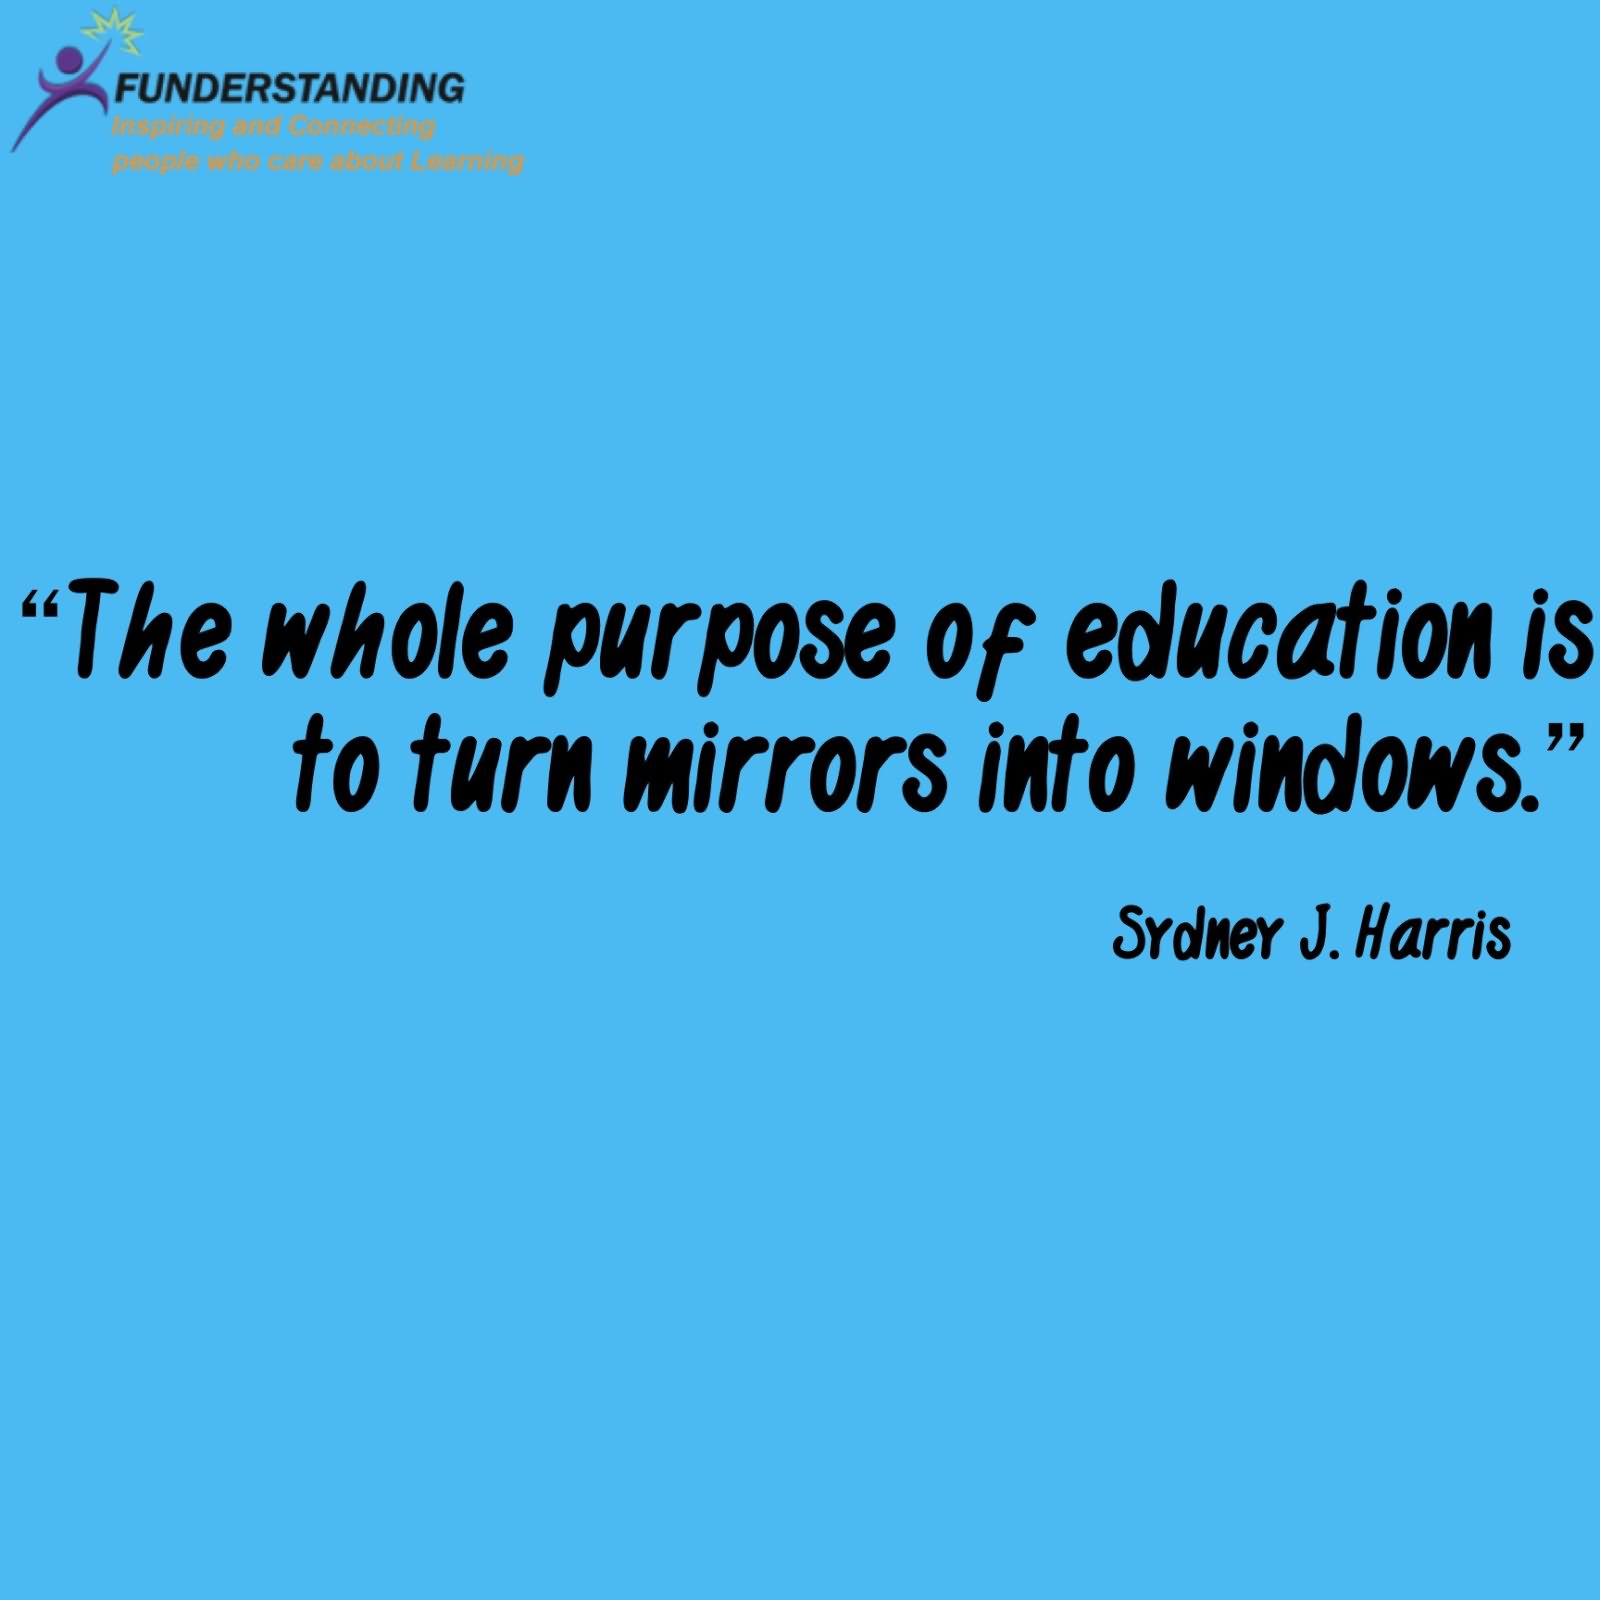 The whole purpose of education is to turn mirrors into windows. - Sydney J. Harris